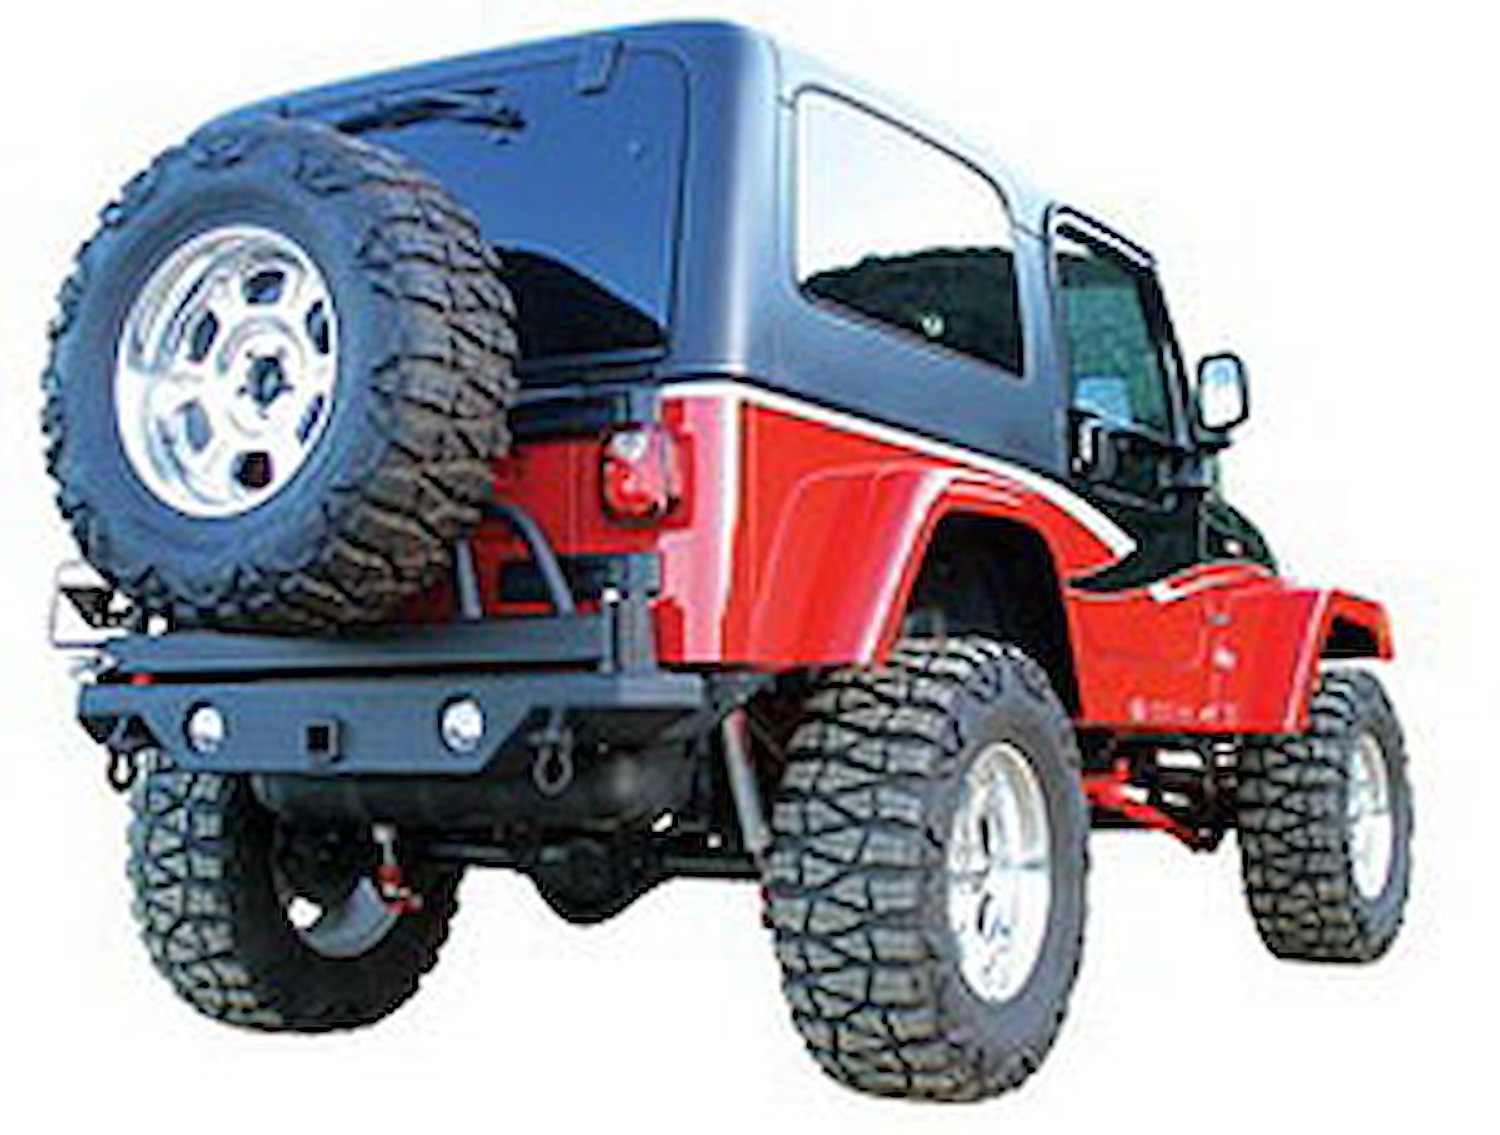 RECOVERY BUMPER REAR WITH SWING AWAY TIRE MOUNT 87-06 WRANGLER LIGHTS SOLD SEPARATELY